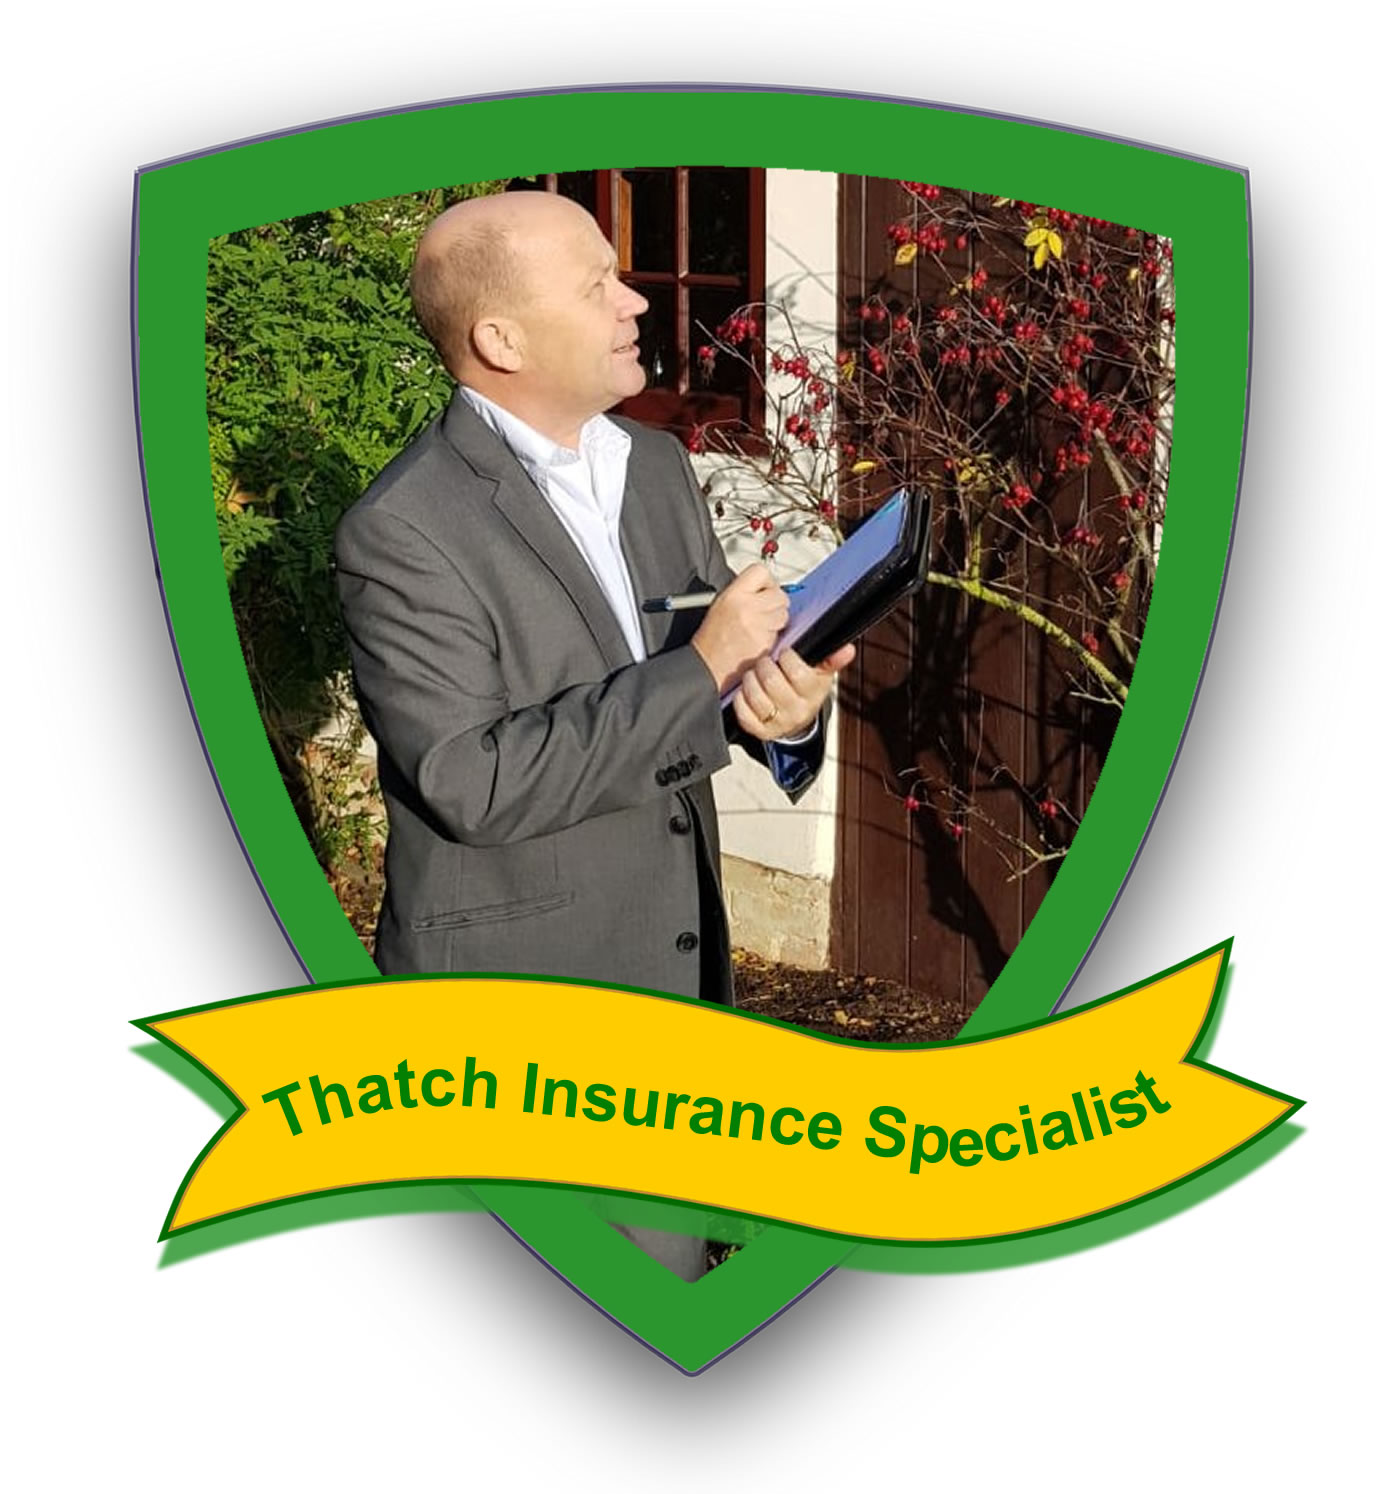 Thatched insurance specialist